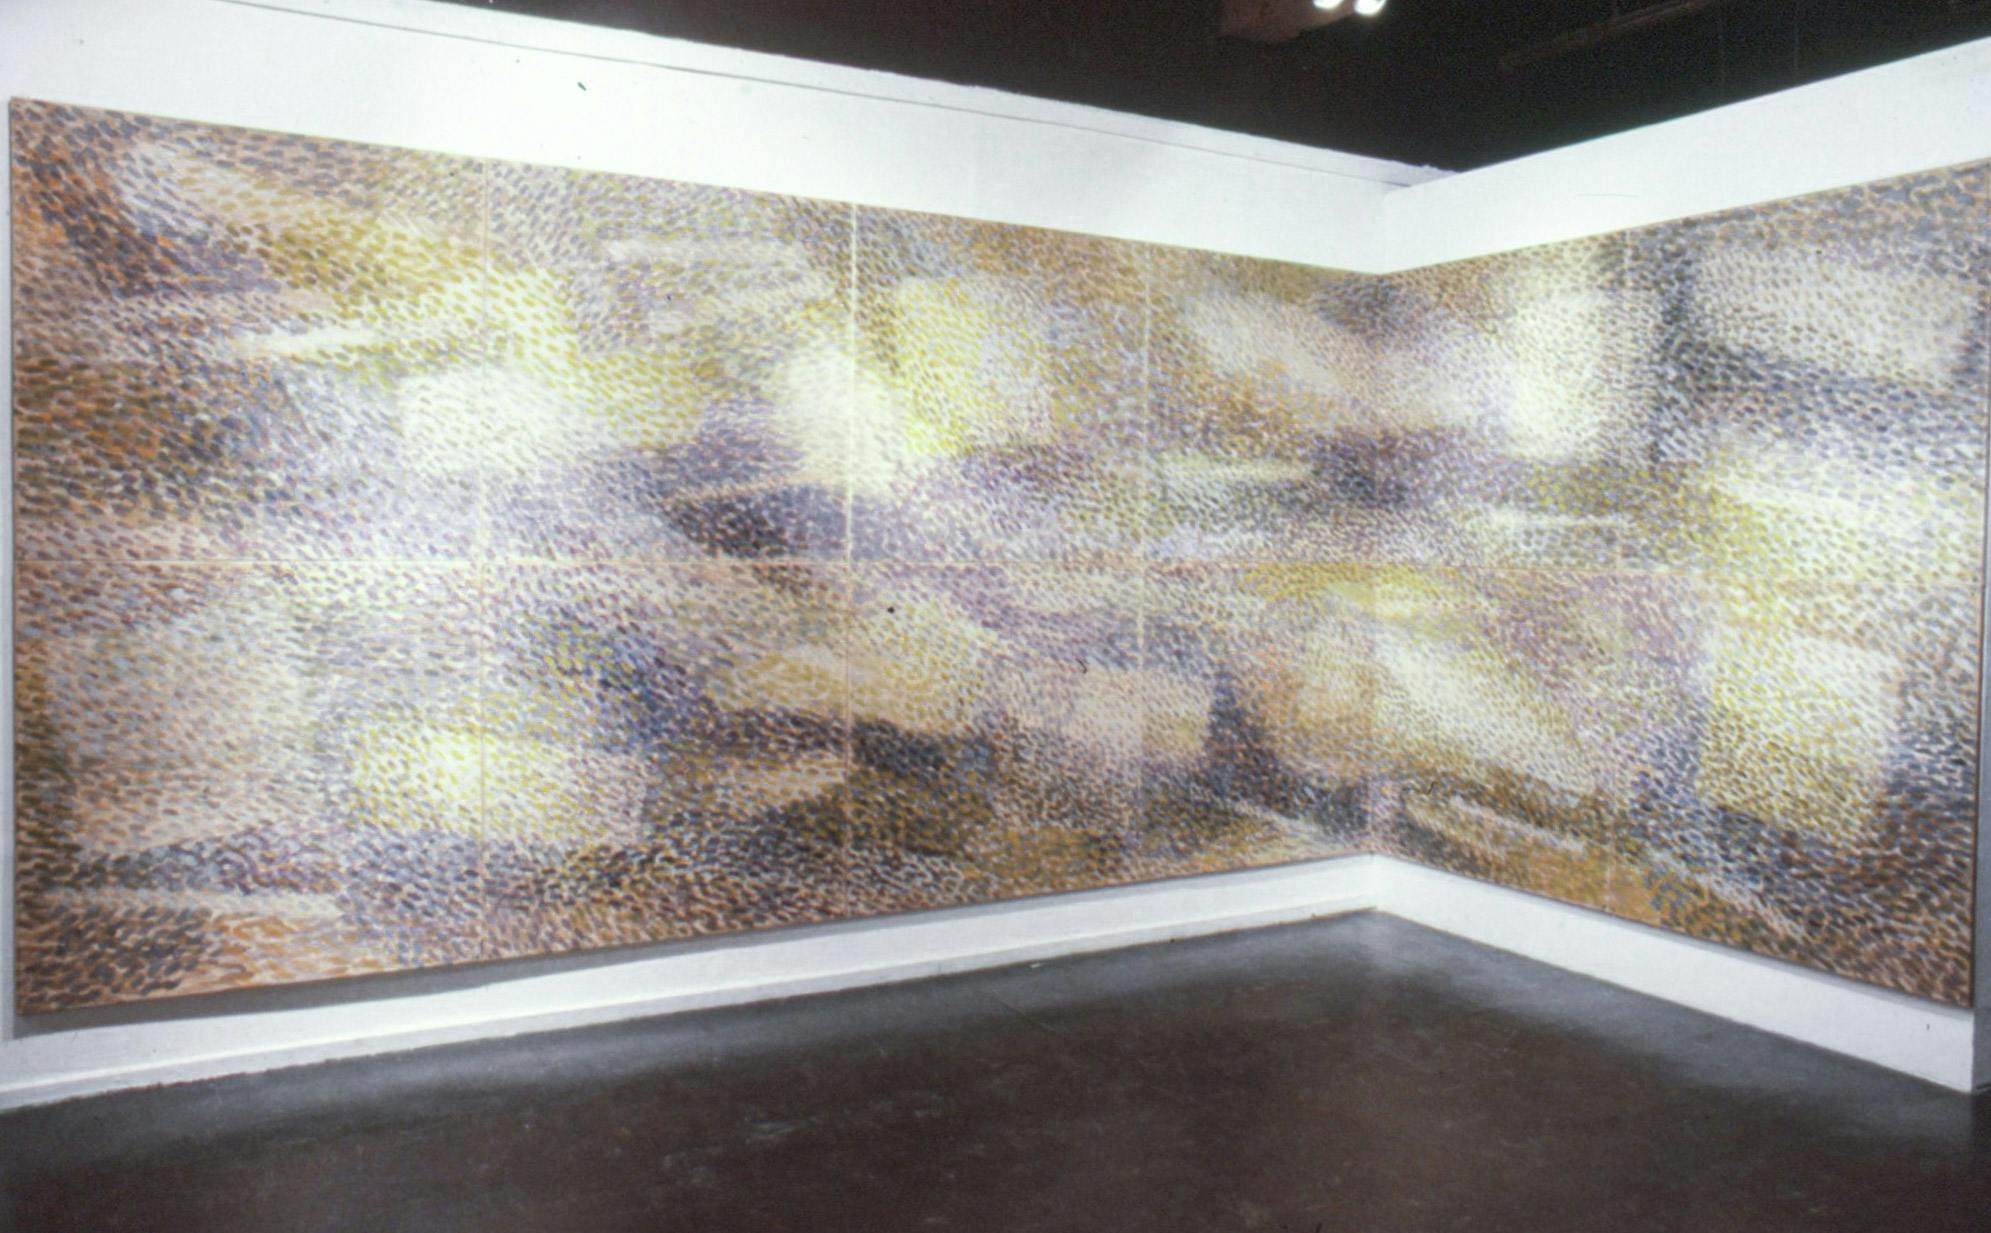 A large painting takes up most of the two walls in the corner of a gallery. It is made of 12 different square plywood panels and painted with small colourful brushstrokes, reminiscent of a landscape.